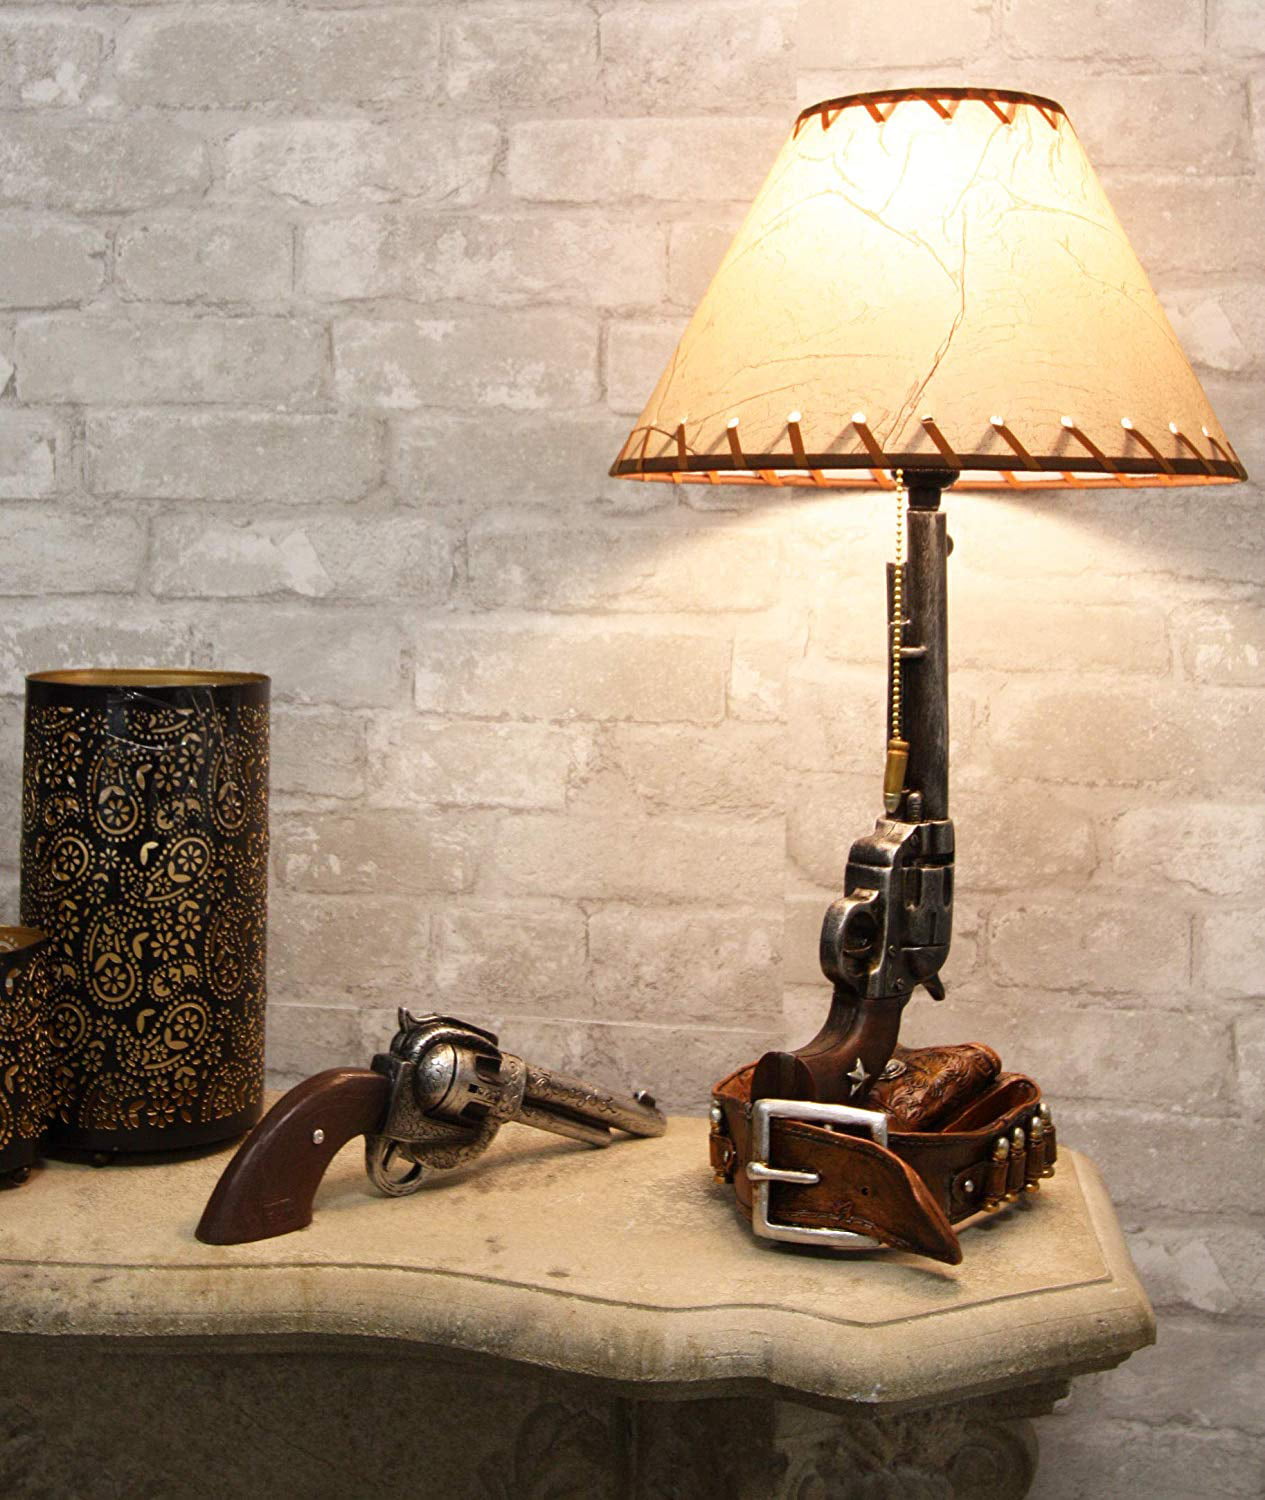 Ebros Western Six Shooter Revolver, Western Themed Floor Lamps